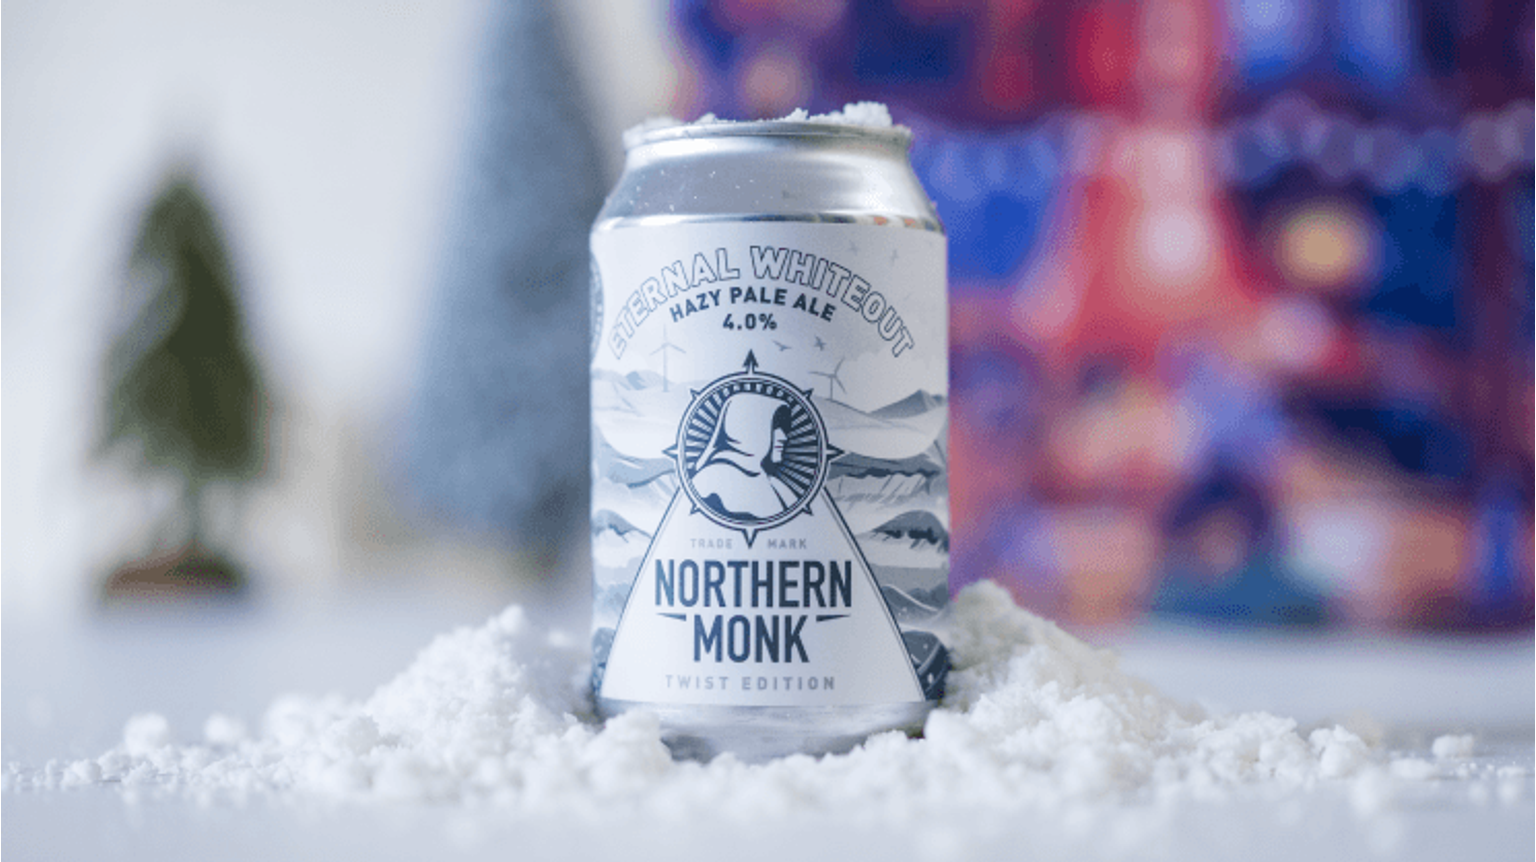 thumbnail for blog article named: Beery Christmas: Northern Monk - Eternal Whiteout